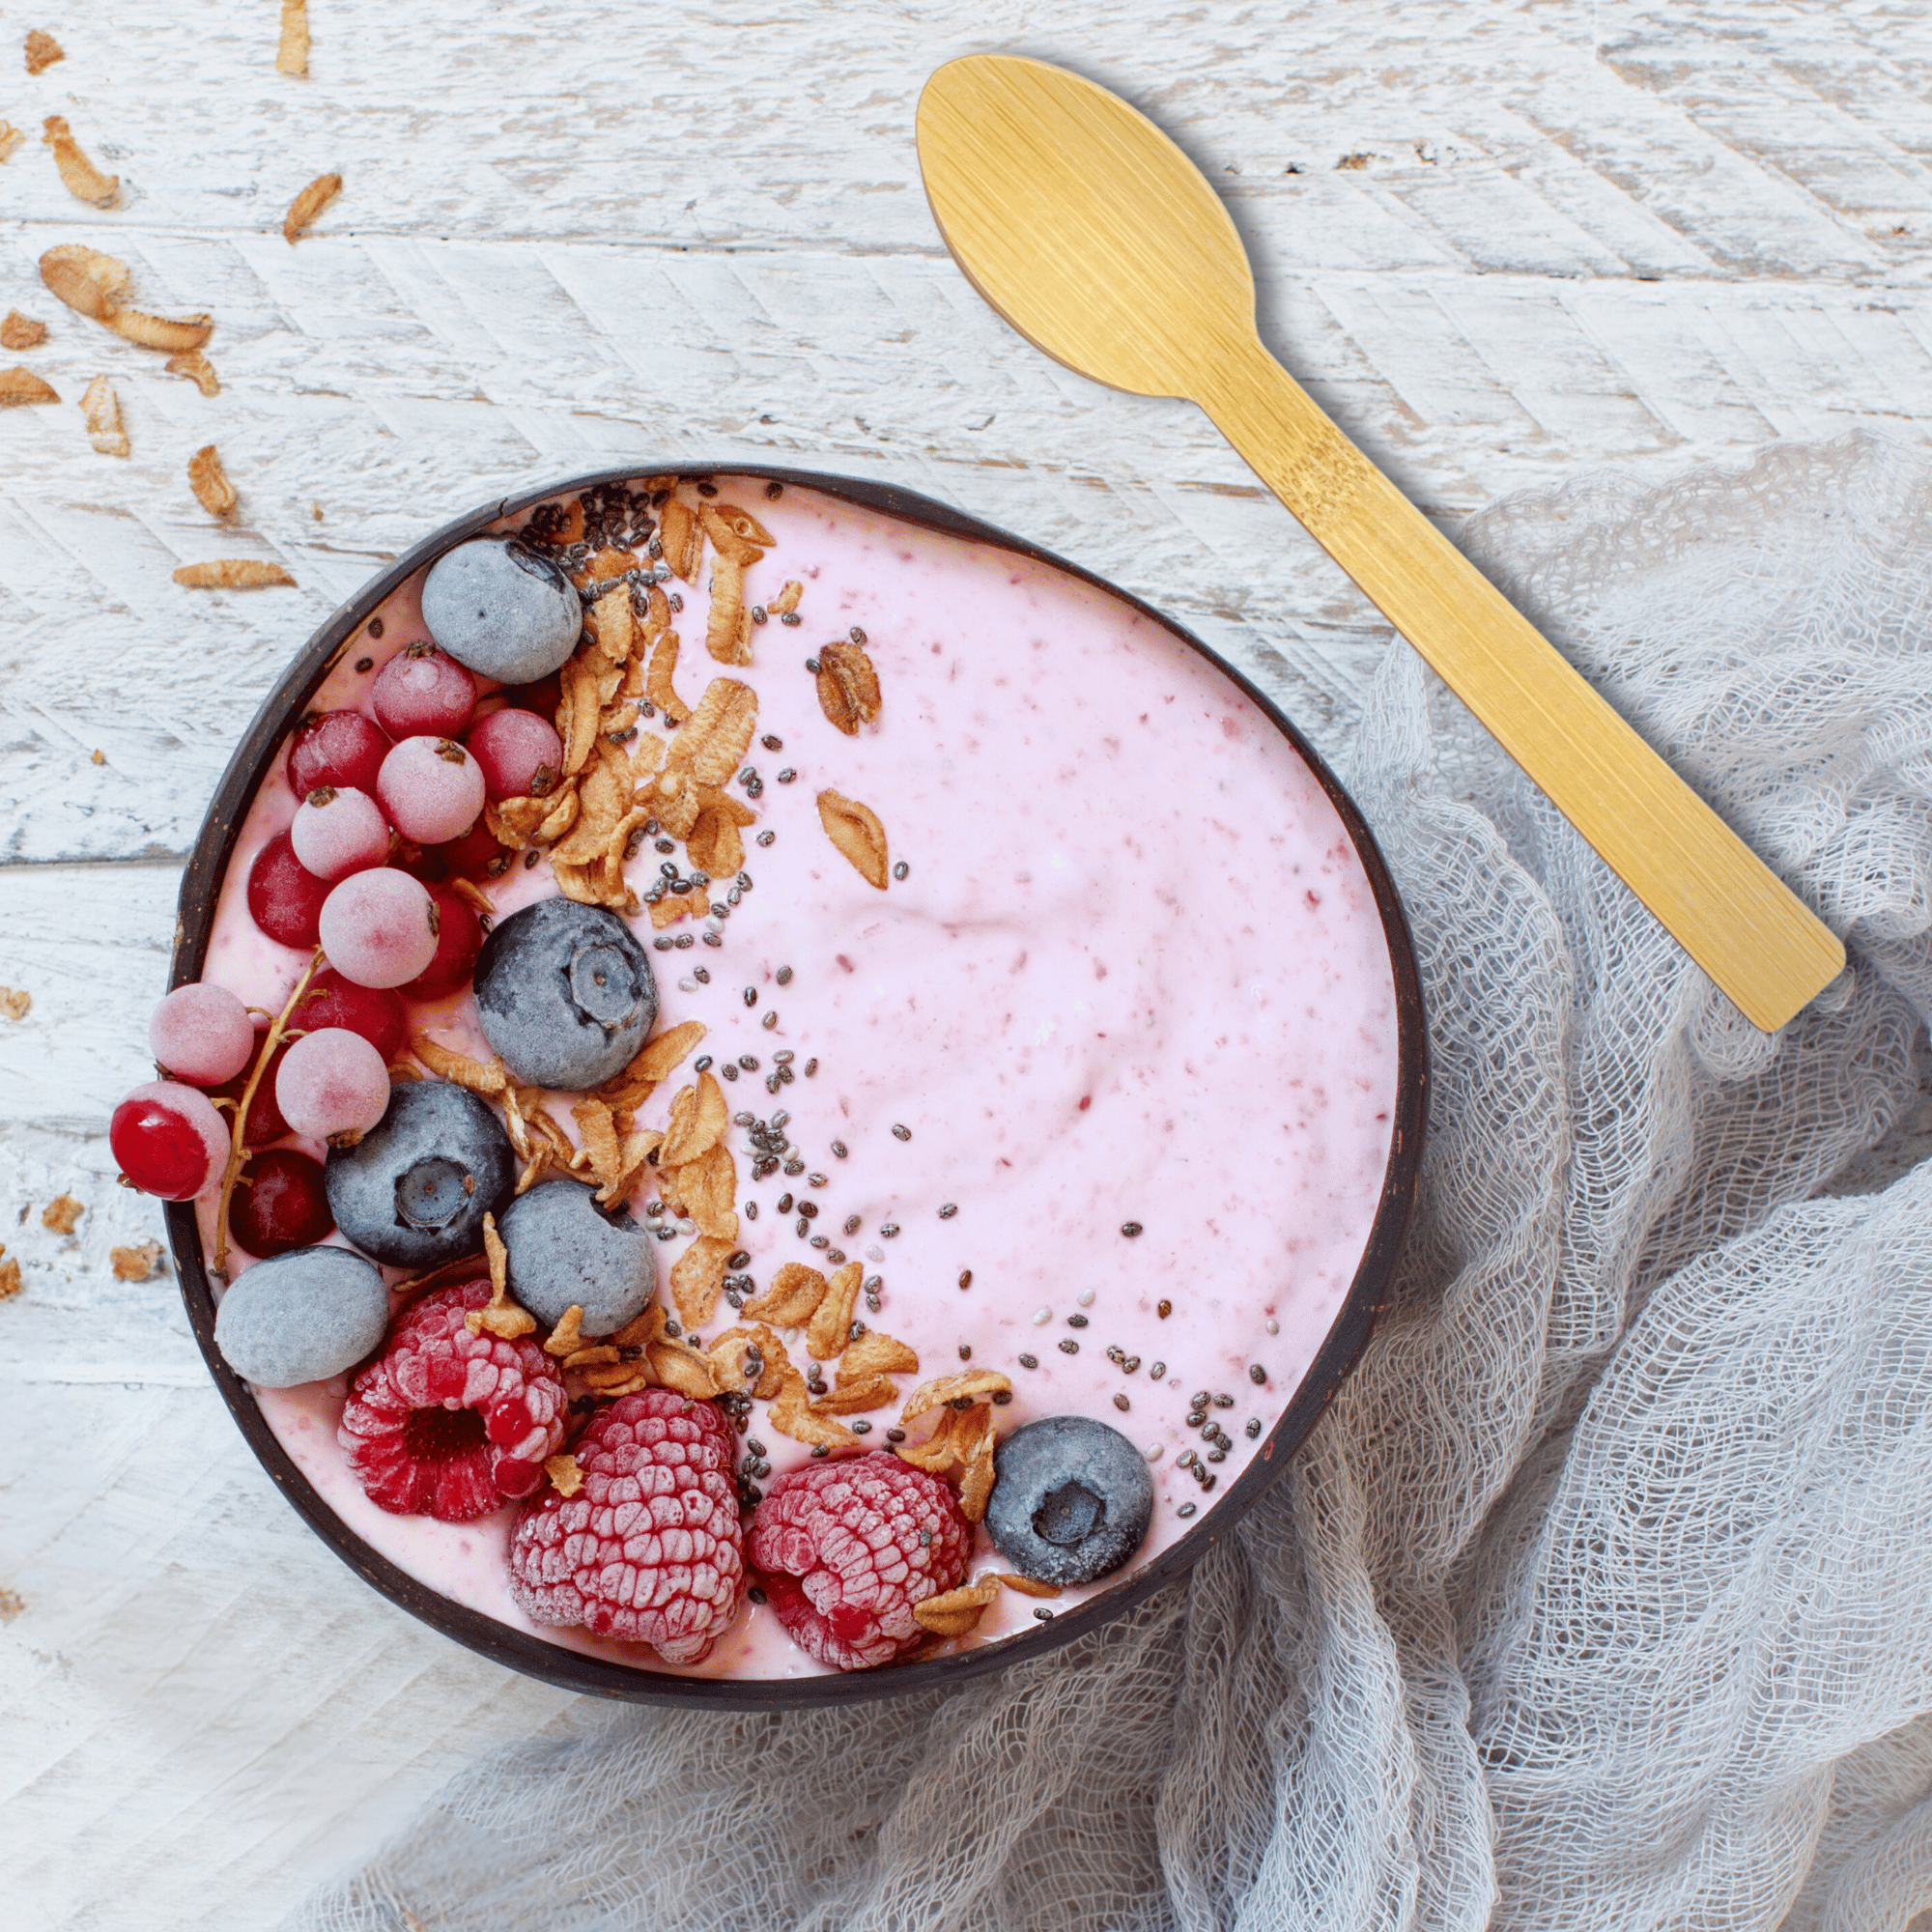 An appealing top-view image showcasing Holy City Straw Co.'s latest sustainable cutlery, a bamboo spoon resting on the side of a bowl filled with creamy pink smoothie. The bowl is beautifully topped with a variety of frozen fruits including red grapes, blueberries, and raspberries, sprinkled with granola and chia seeds, all arranged on a rustic white wooden surface with a delicate gauze fabric underneath